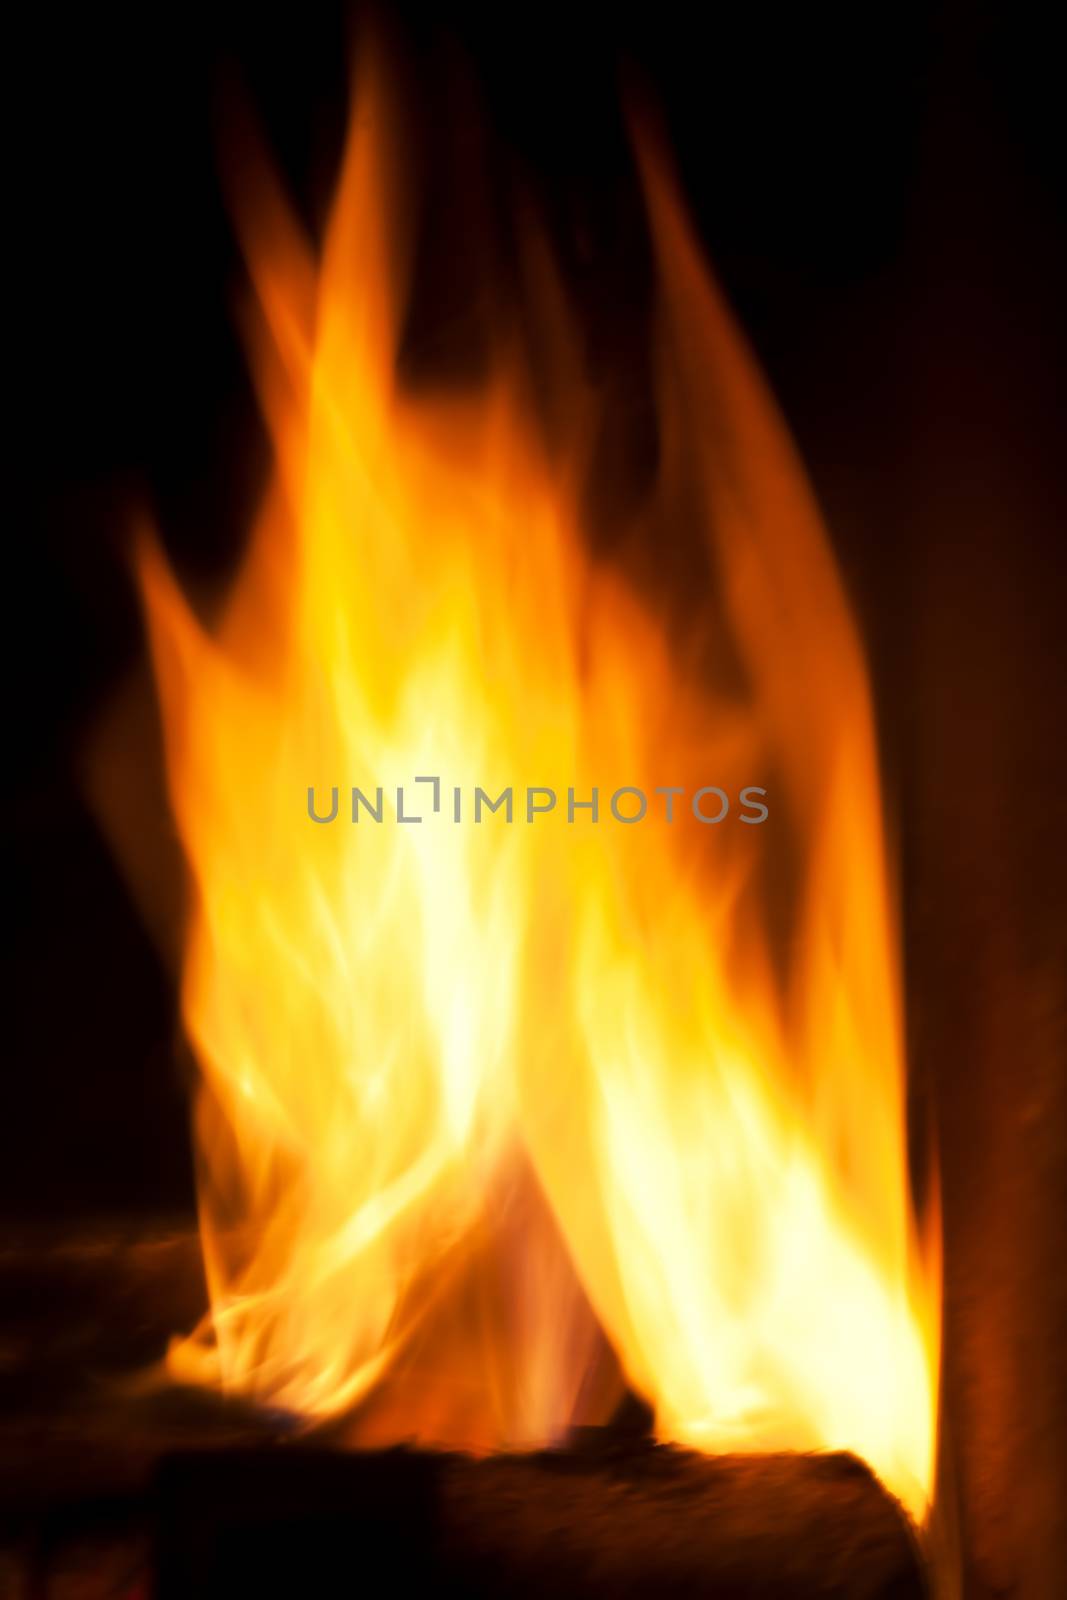 Fire flames on black background. A photograph